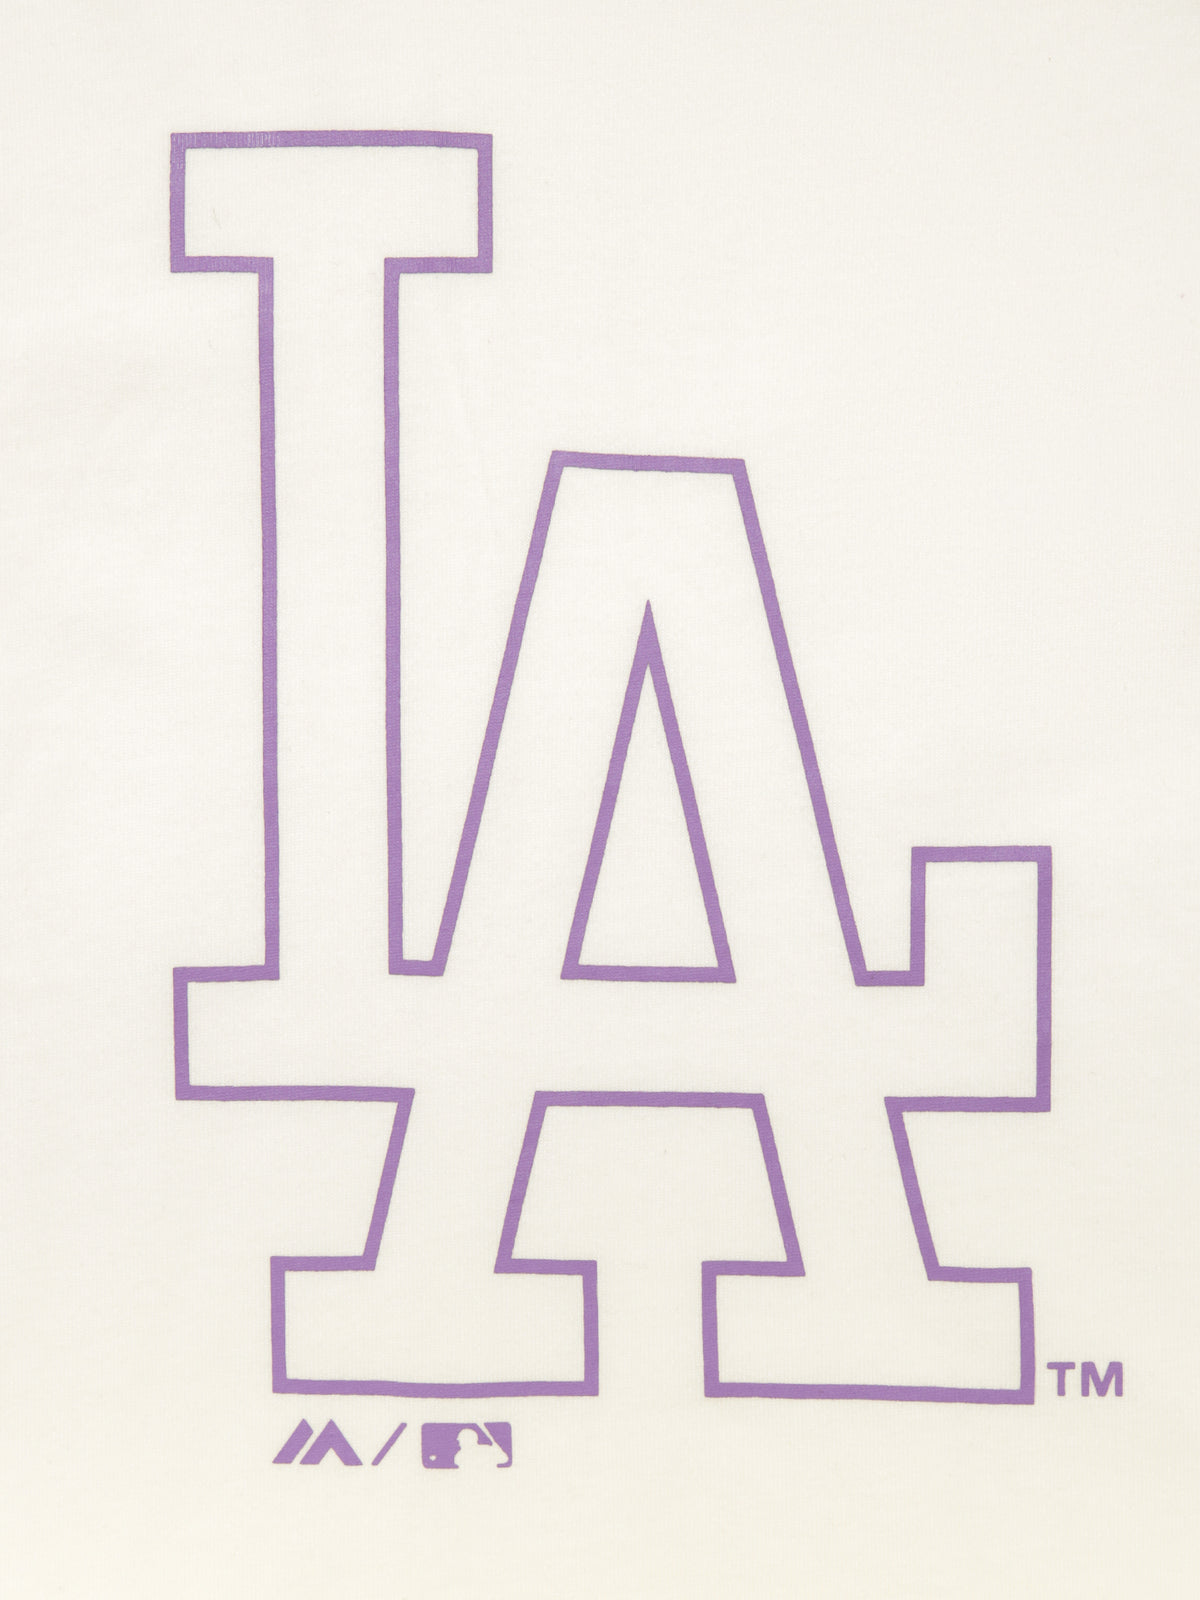 Big Dodgers Logo Boxy T-Shirt in Unbleached